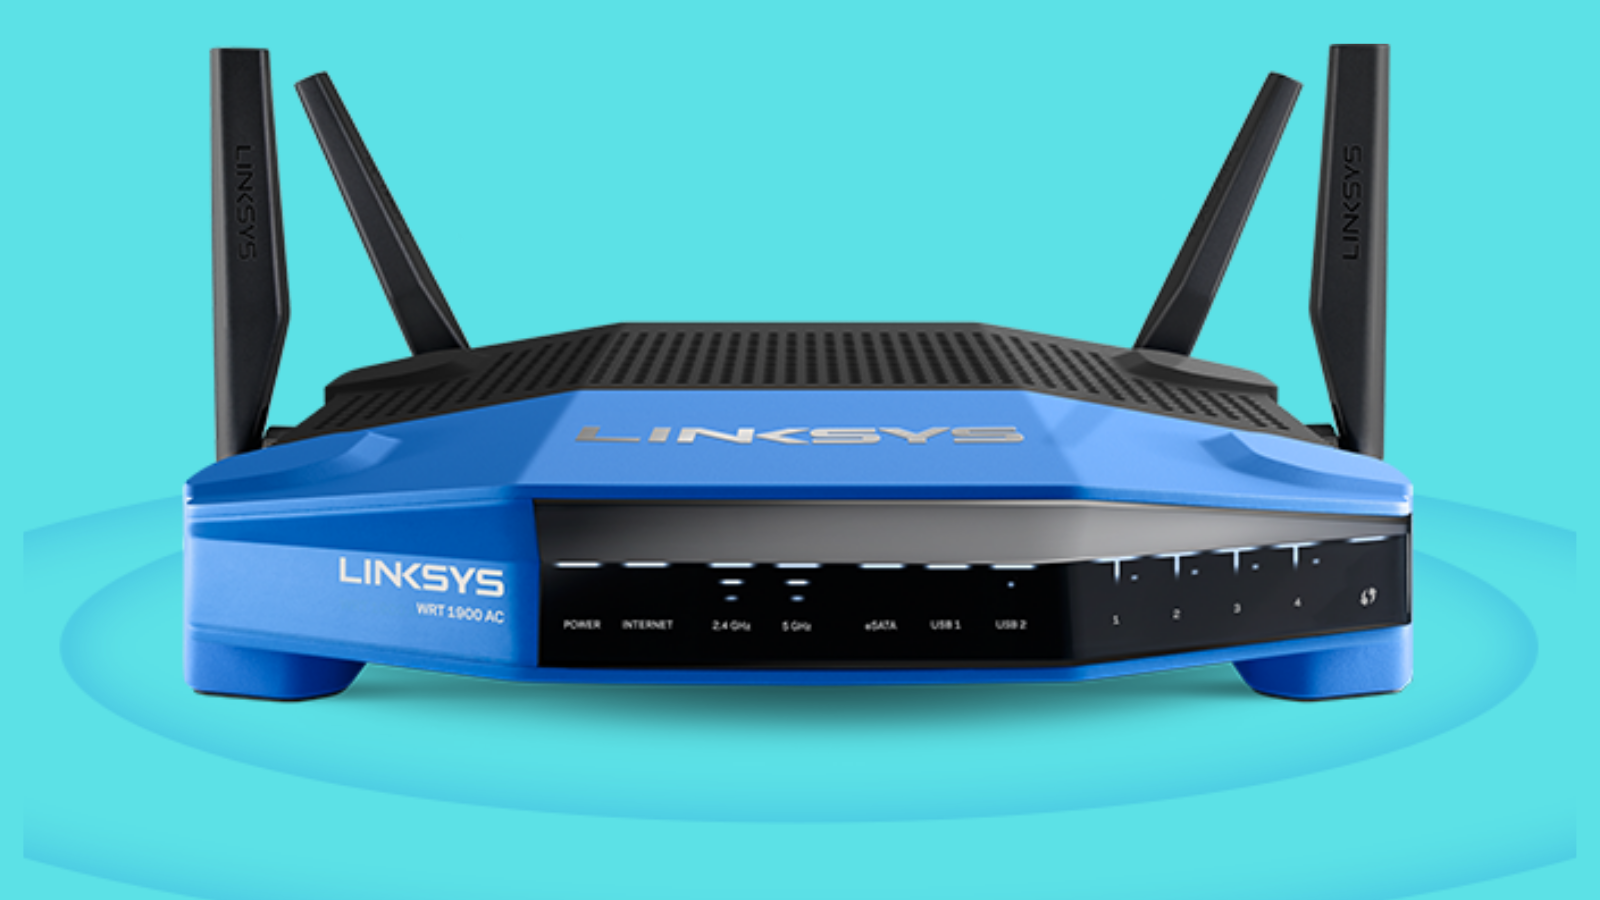 11 Best Linksys Routers To Buy In 2021 For All Budgets Technadu